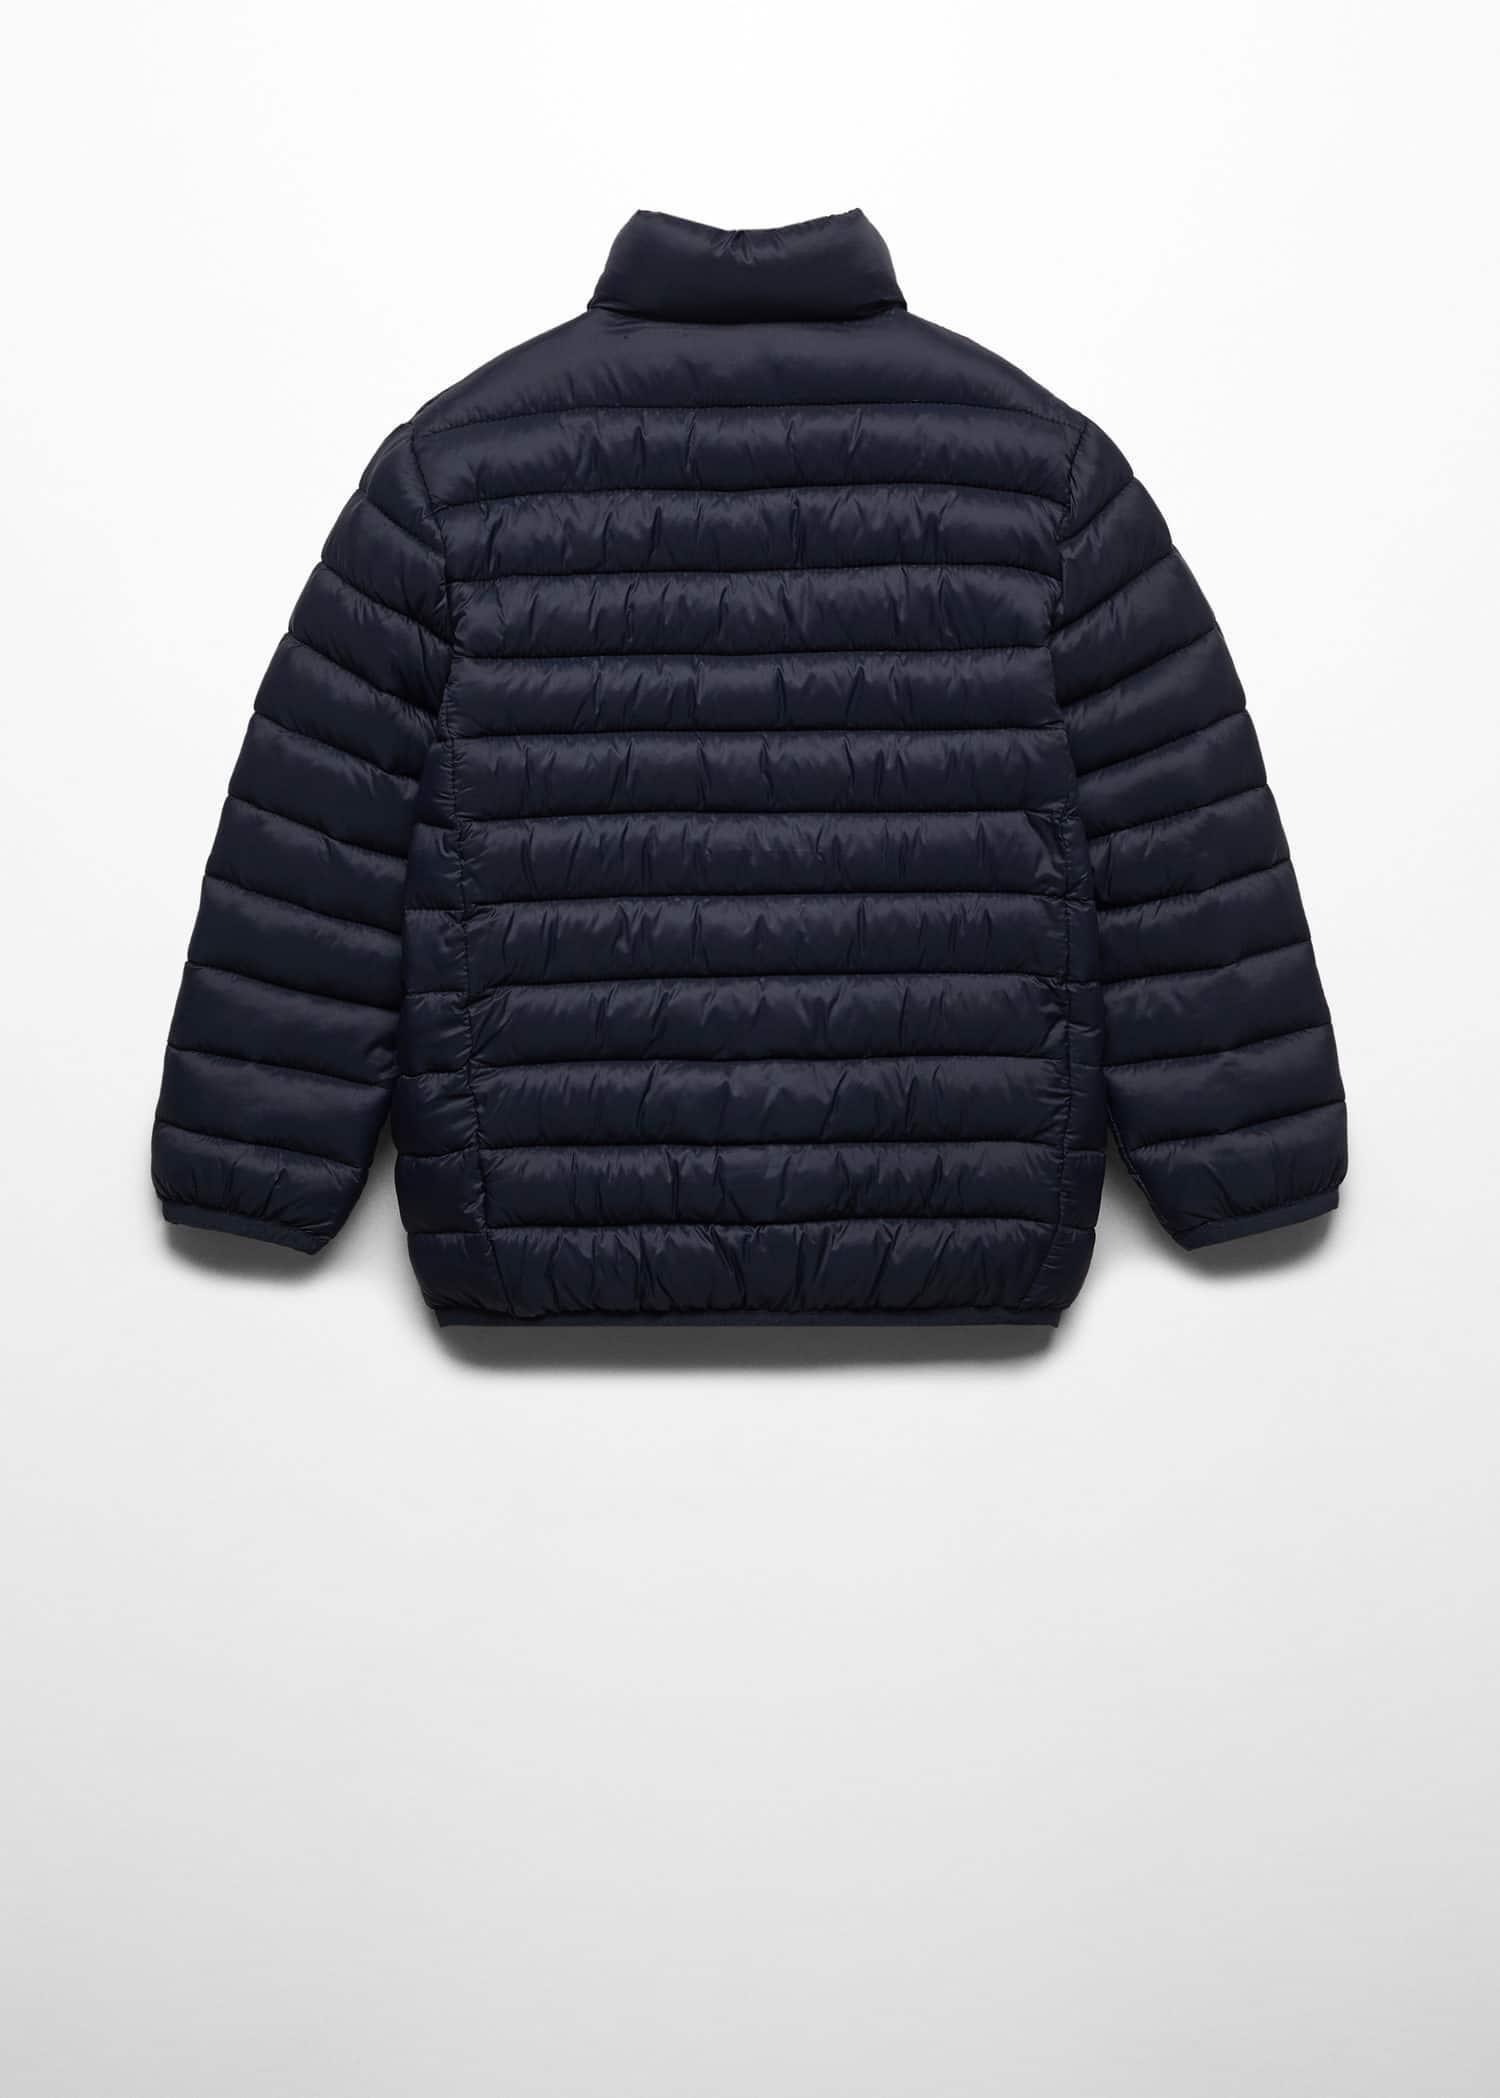 Mango - Navy Quilted Jacket, Kids Boys